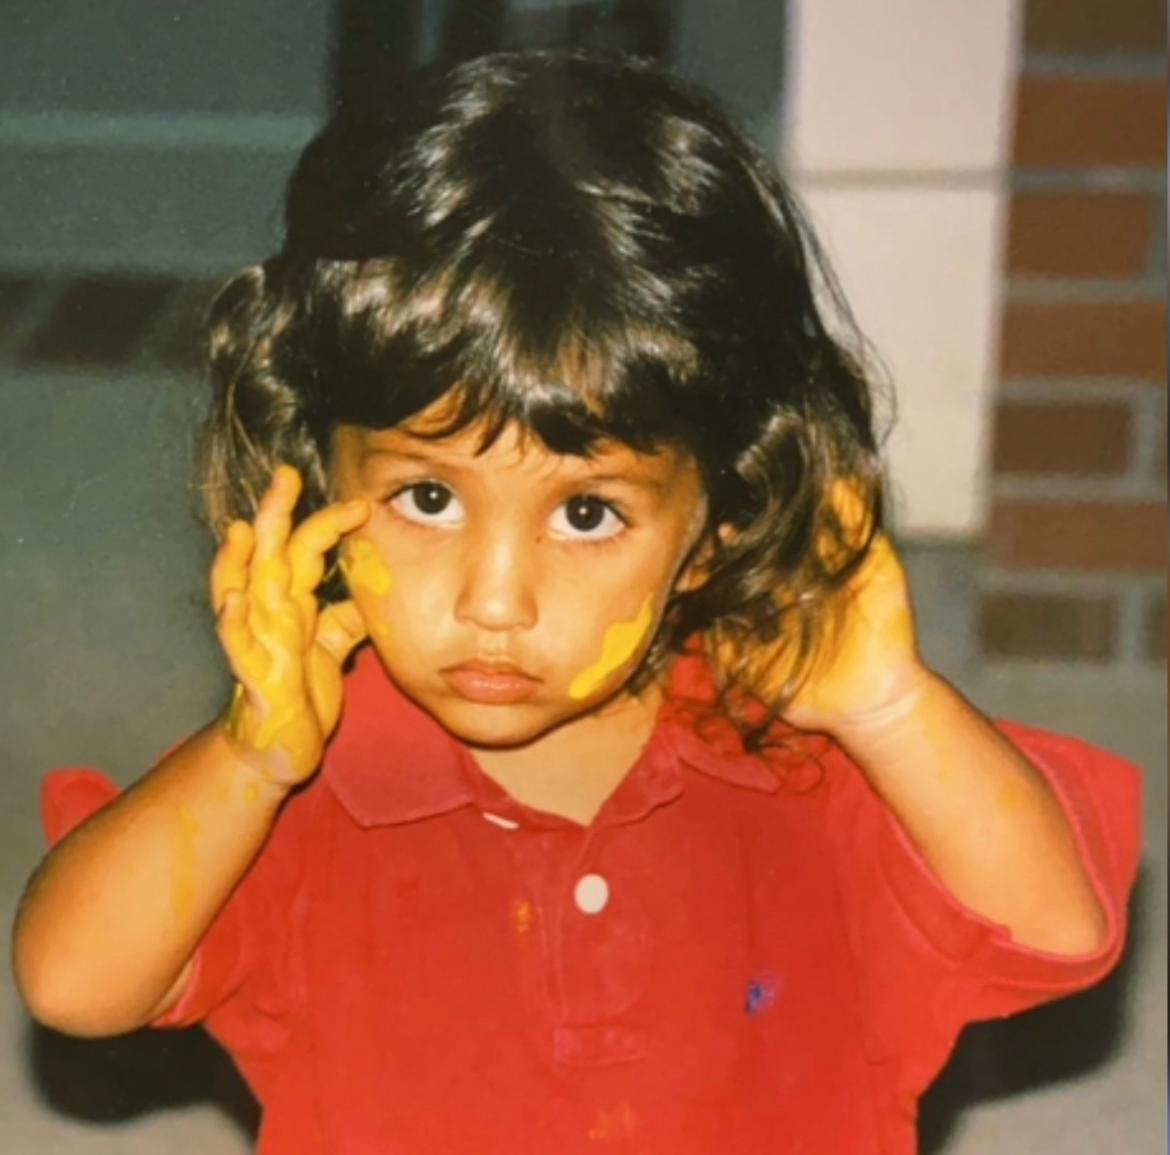 Bailey McNamee as a child wearing a red shirt with yellow paint on her hands/face.